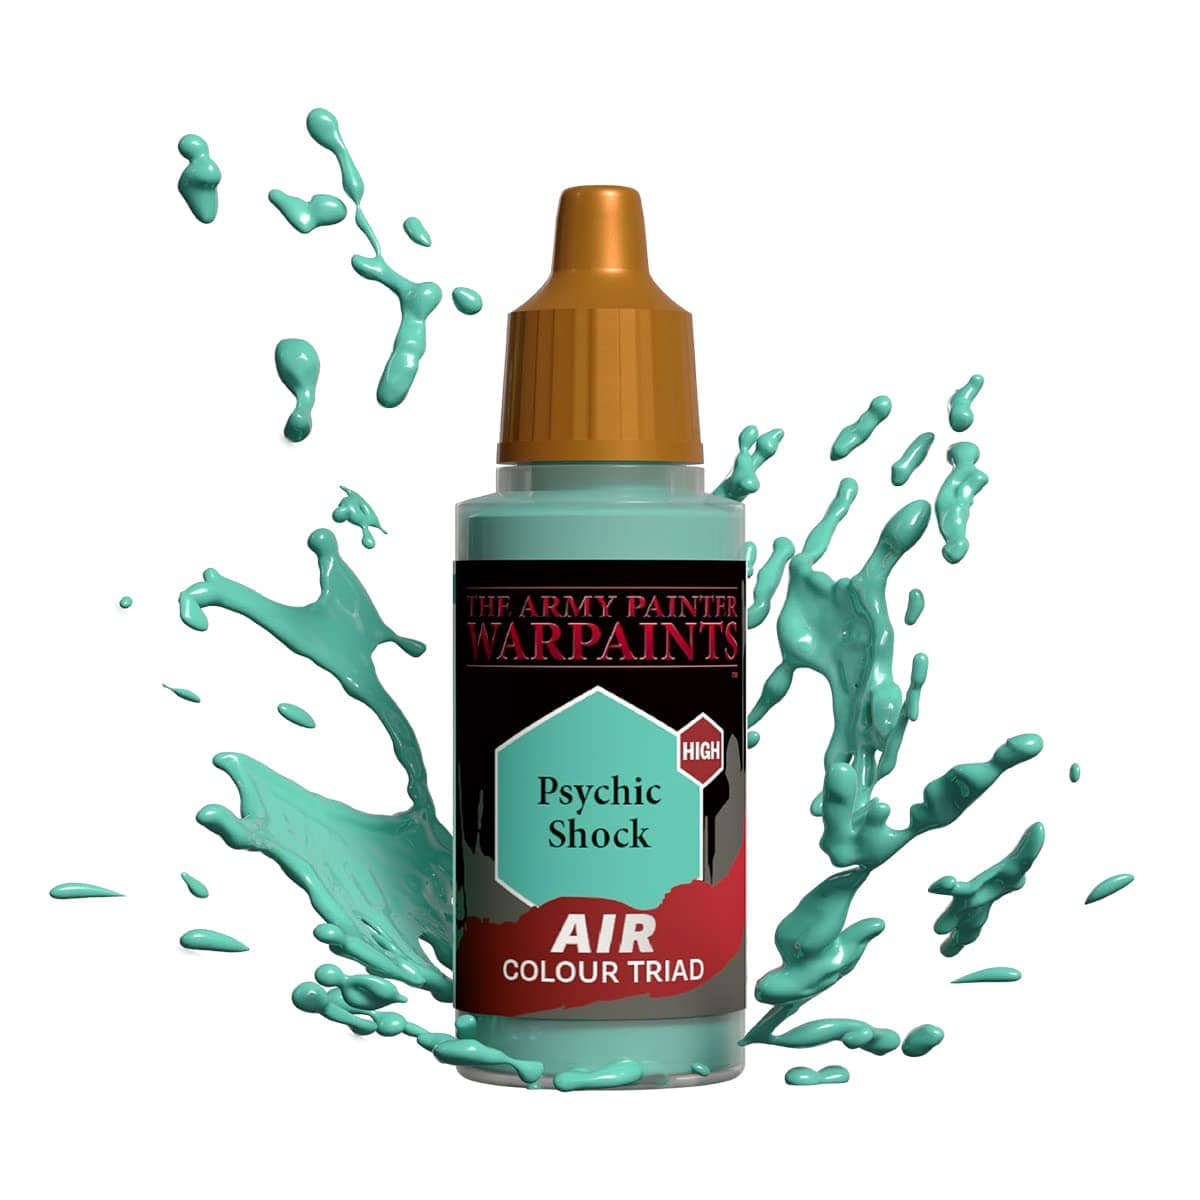 The Army Painter Accessories The Army Painter Warpaints Air: Psychic Shock 18ml